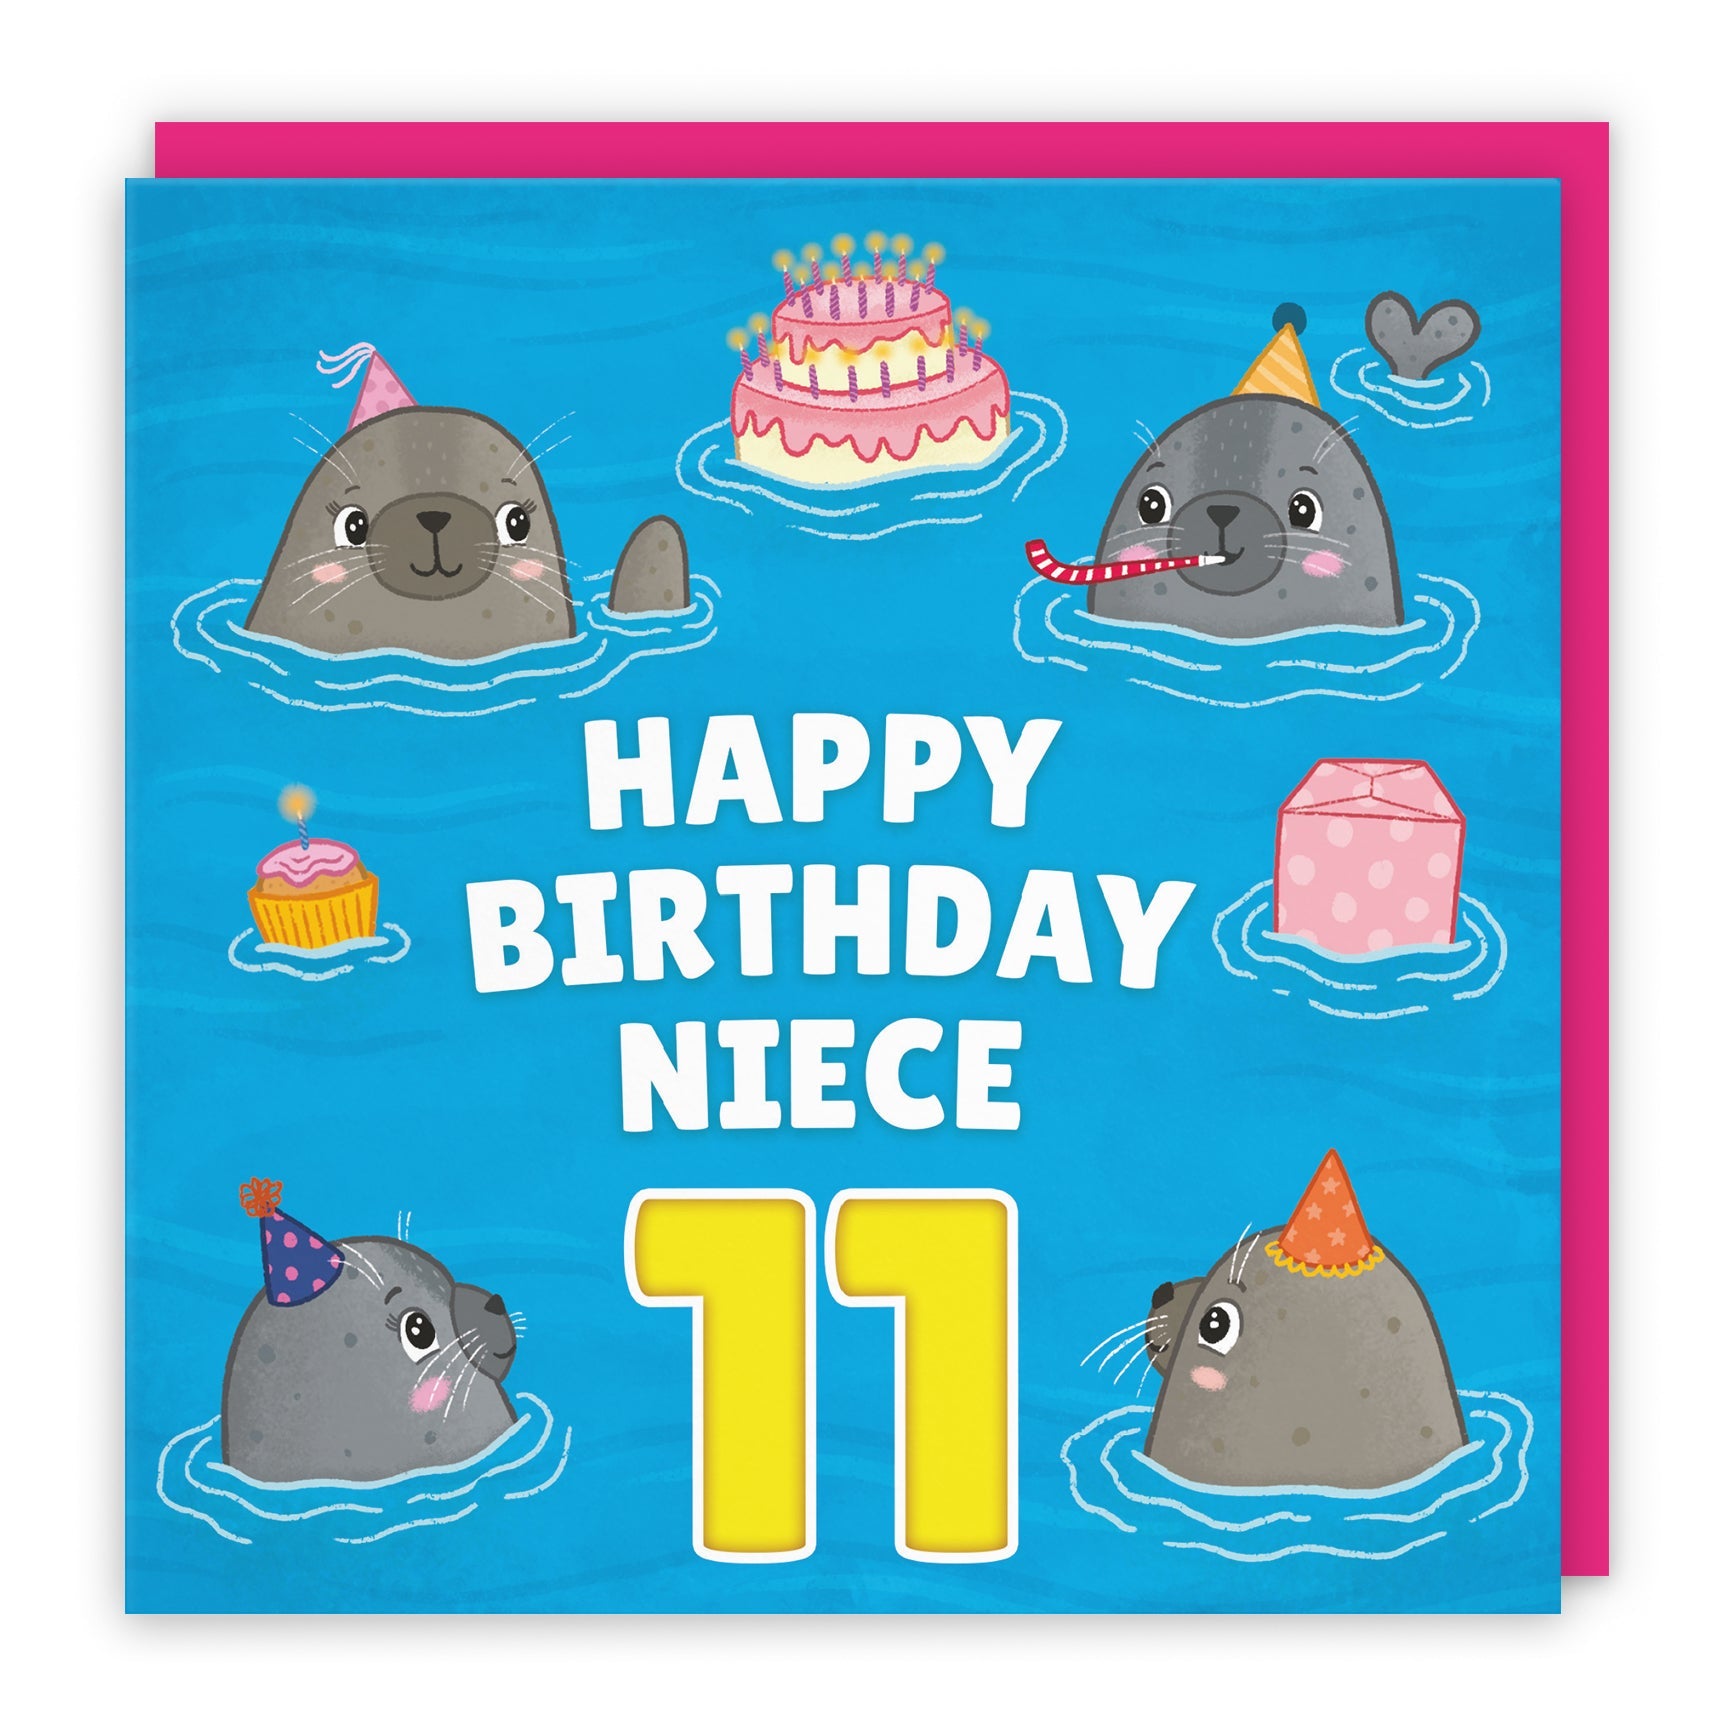 Niece Birthday Cards - For Kids - For Adults